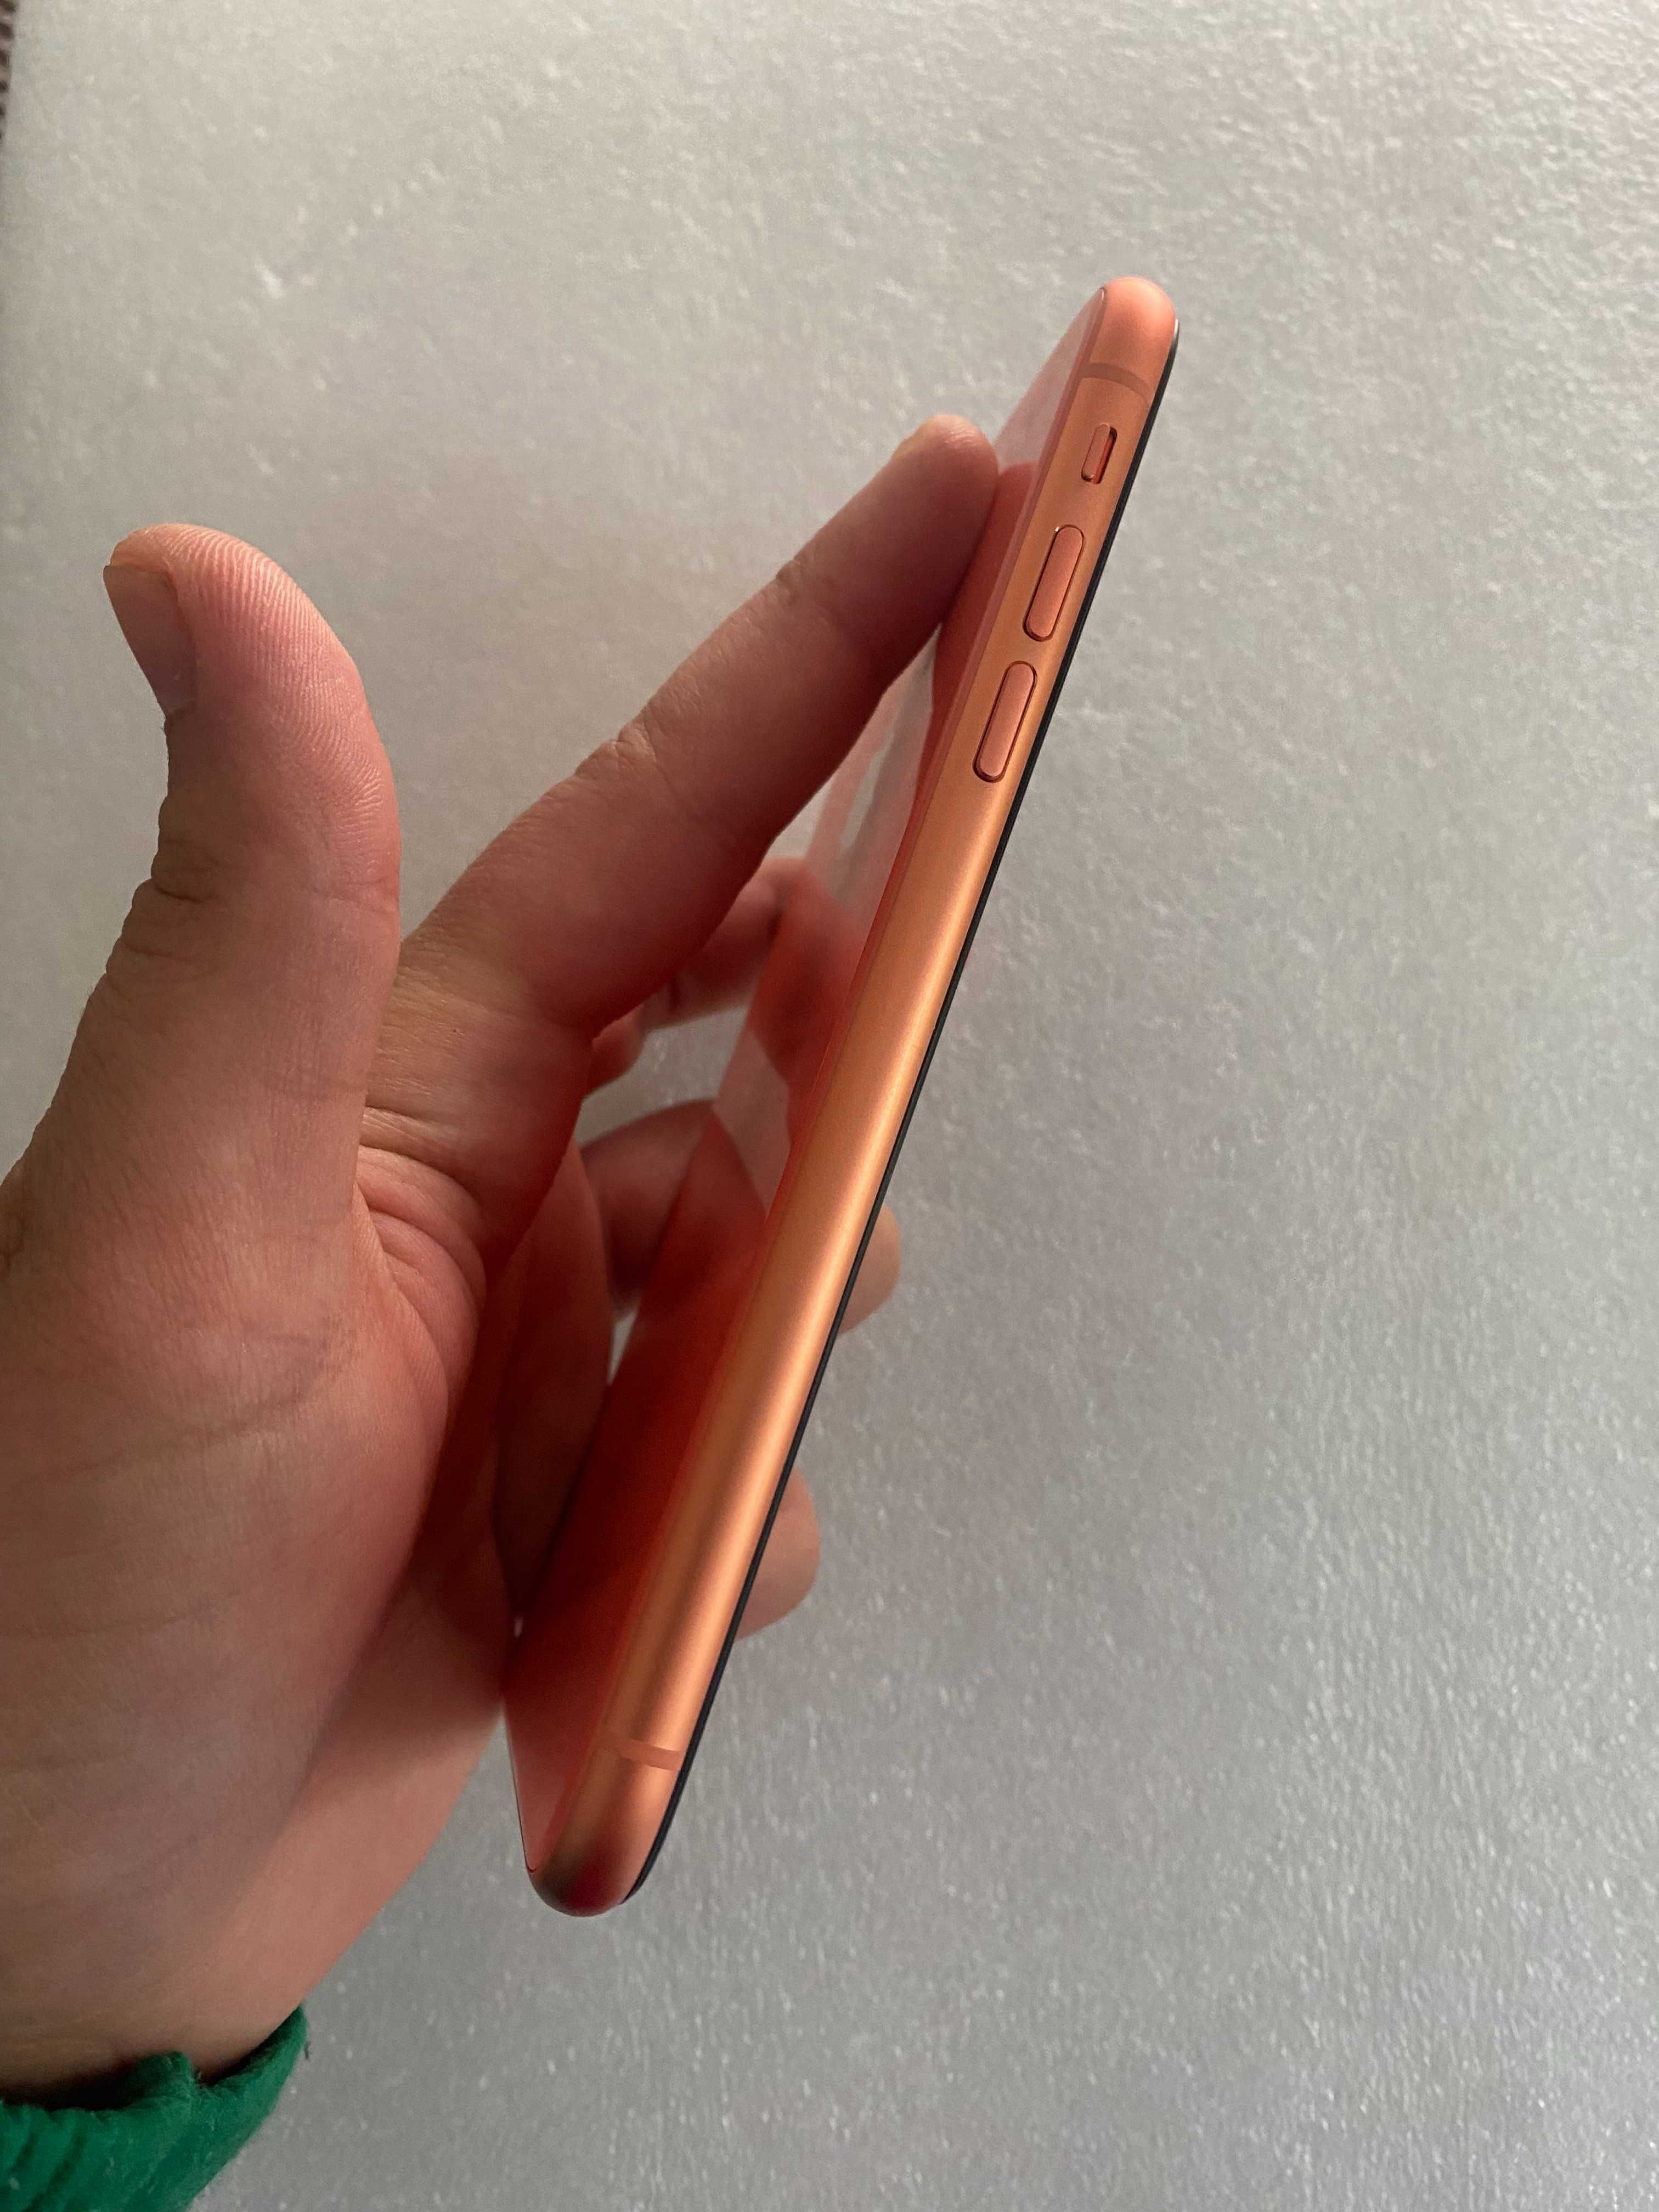 iPhone XR coral -64 GB /LIBER